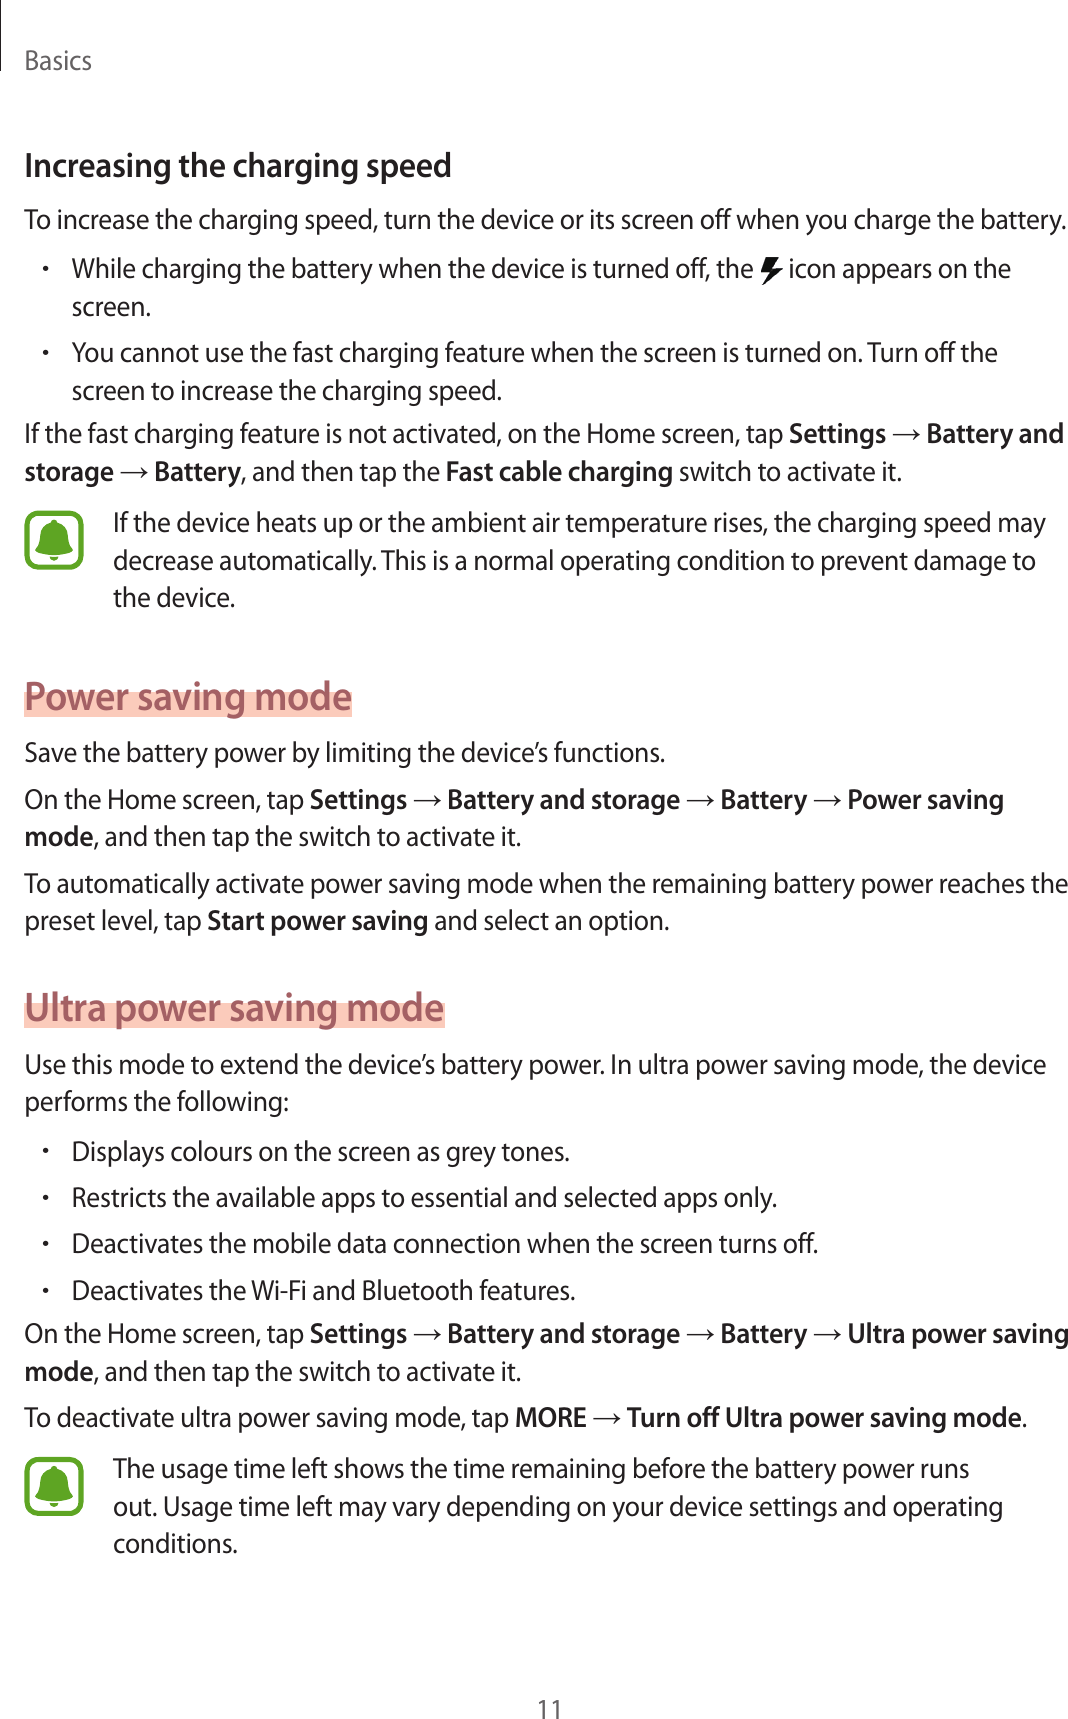 Basics11Increasing the charging speedTo increase the charging speed, turn the device or its screen off when you charge the battery.•While charging the battery when the device is turned off, the   icon appears on the screen.•You cannot use the fast charging feature when the screen is turned on. Turn off the screen to increase the charging speed.If the fast charging feature is not activated, on the Home screen, tap Settings → Battery and storage → Battery, and then tap the Fast cable charging switch to activate it.If the device heats up or the ambient air temperature rises, the charging speed may decrease automatically. This is a normal operating condition to prevent damage to the device.Power saving modeSave the battery power by limiting the device’s functions.On the Home screen, tap Settings → Battery and storage → Battery → Power saving mode, and then tap the switch to activate it.To automatically activate power saving mode when the remaining battery power reaches the preset level, tap Start power saving and select an option.Ultra power saving modeUse this mode to extend the device’s battery power. In ultra power saving mode, the device performs the following:•Displays colours on the screen as grey tones.•Restricts the available apps to essential and selected apps only.•Deactivates the mobile data connection when the screen turns off.•Deactivates the Wi-Fi and Bluetooth features.On the Home screen, tap Settings → Battery and storage → Battery → Ultra power saving mode, and then tap the switch to activate it.To deactivate ultra power saving mode, tap MORE → Turn off Ultra power saving mode.The usage time left shows the time remaining before the battery power runs out. Usage time left may vary depending on your device settings and operating conditions.